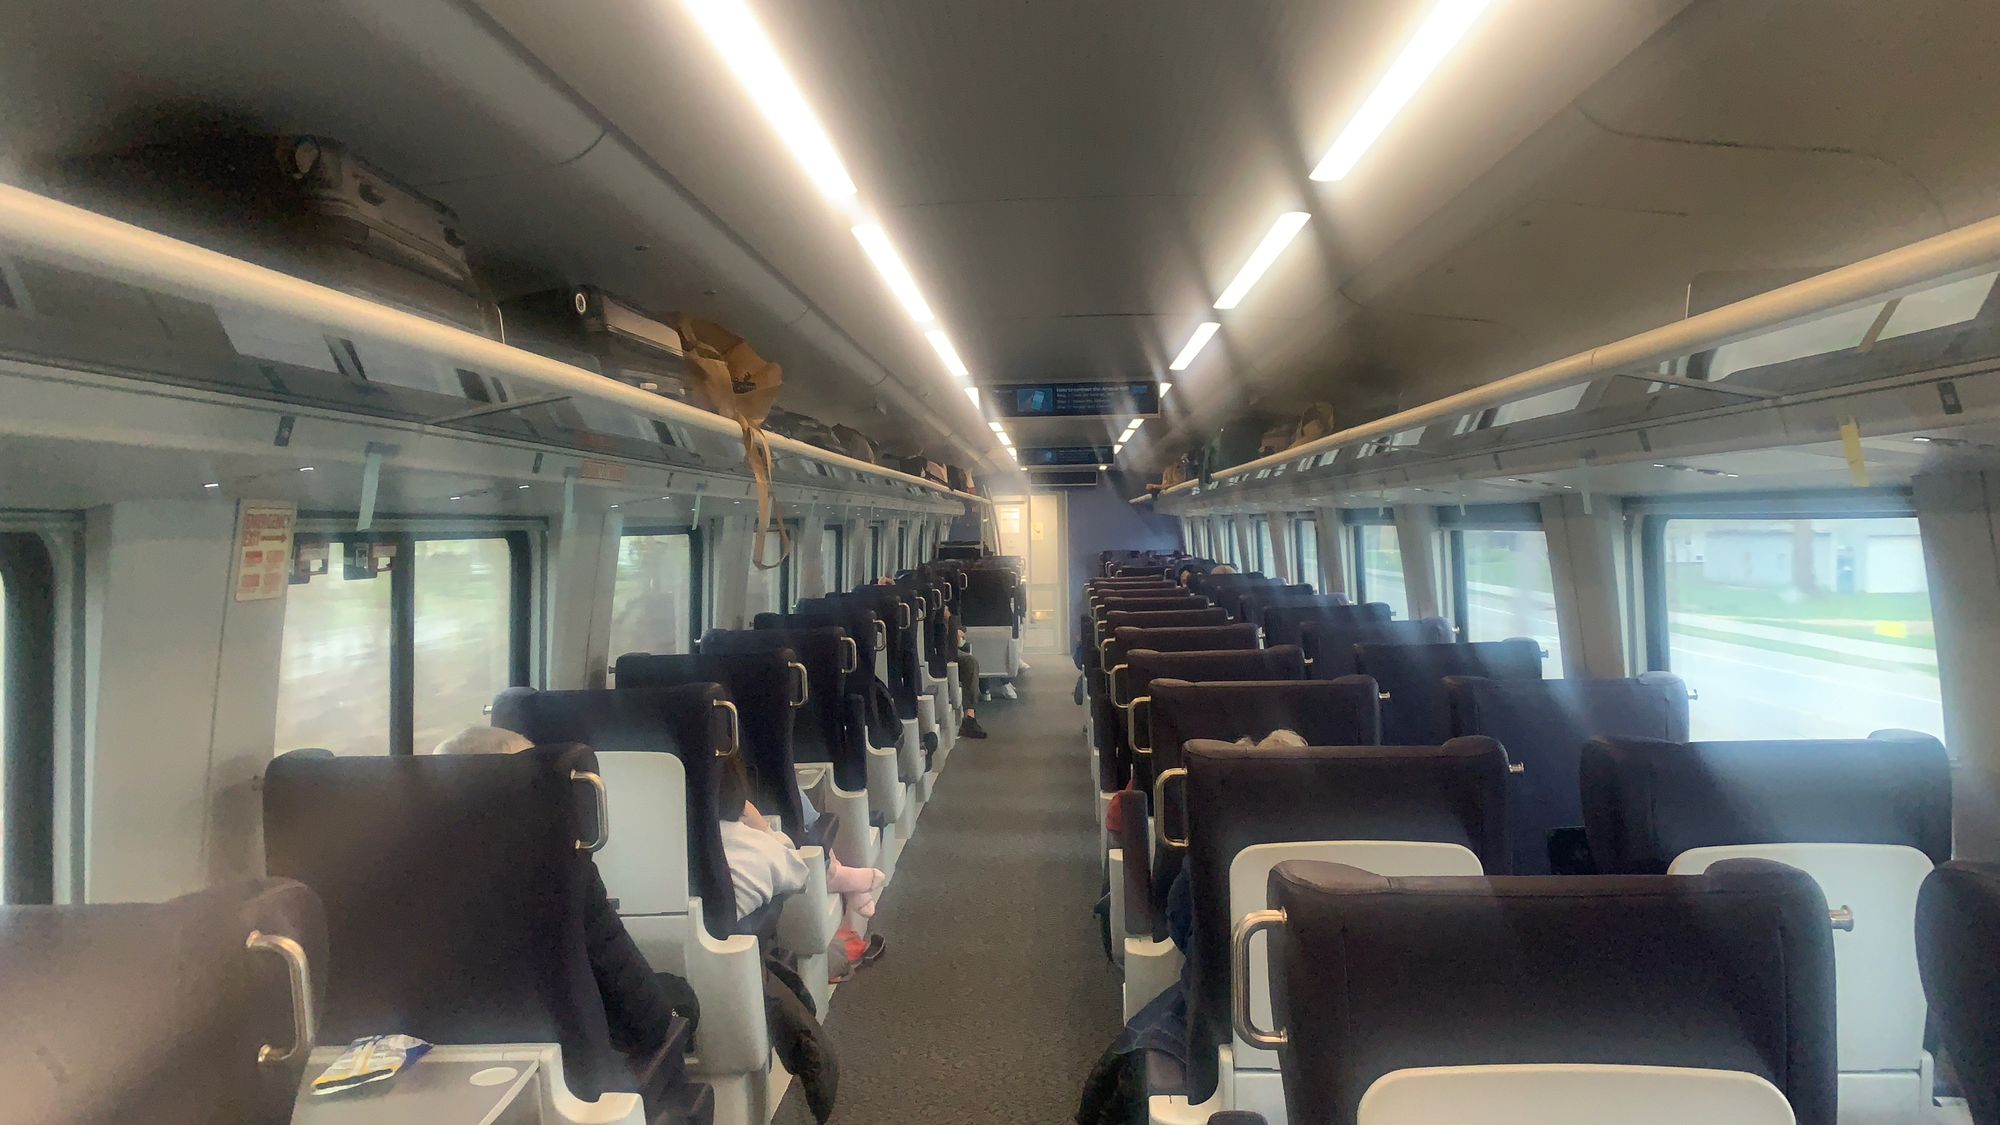 A photo taken from the rear looking down the aisle toward the front of a new Siemens Venture train car. Each row has two seats on the right and a single seat on the left.